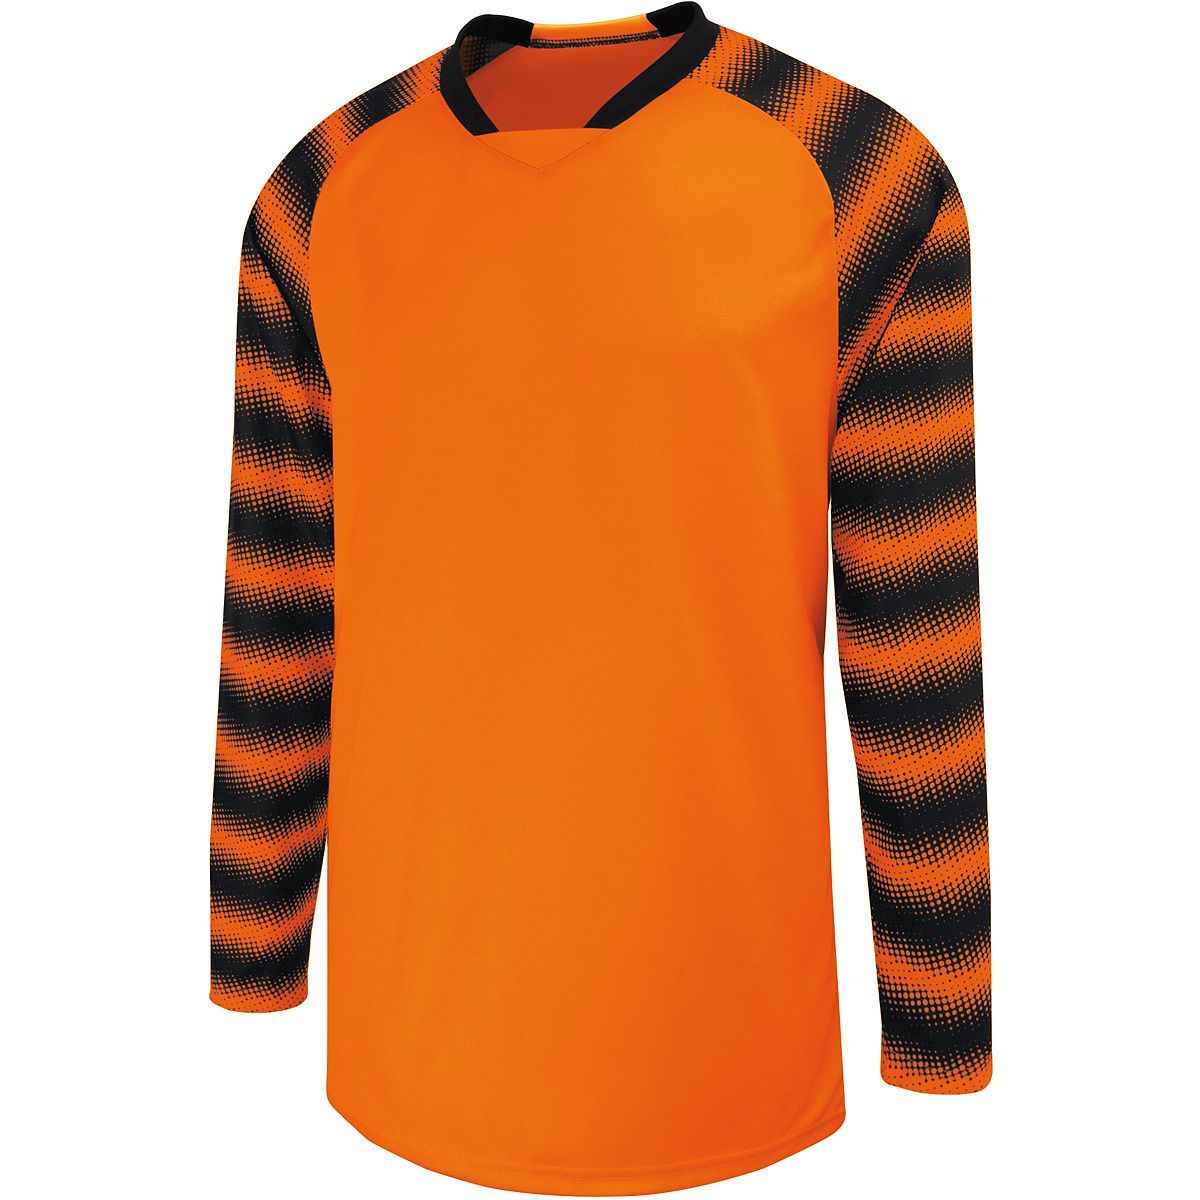 High 5 Youth Prism Goalkeeper Jersey in Orange/Black  -Part of the Youth, Youth-Jersey, High5-Products, Soccer, Shirts, All-Sports-1 product lines at KanaleyCreations.com